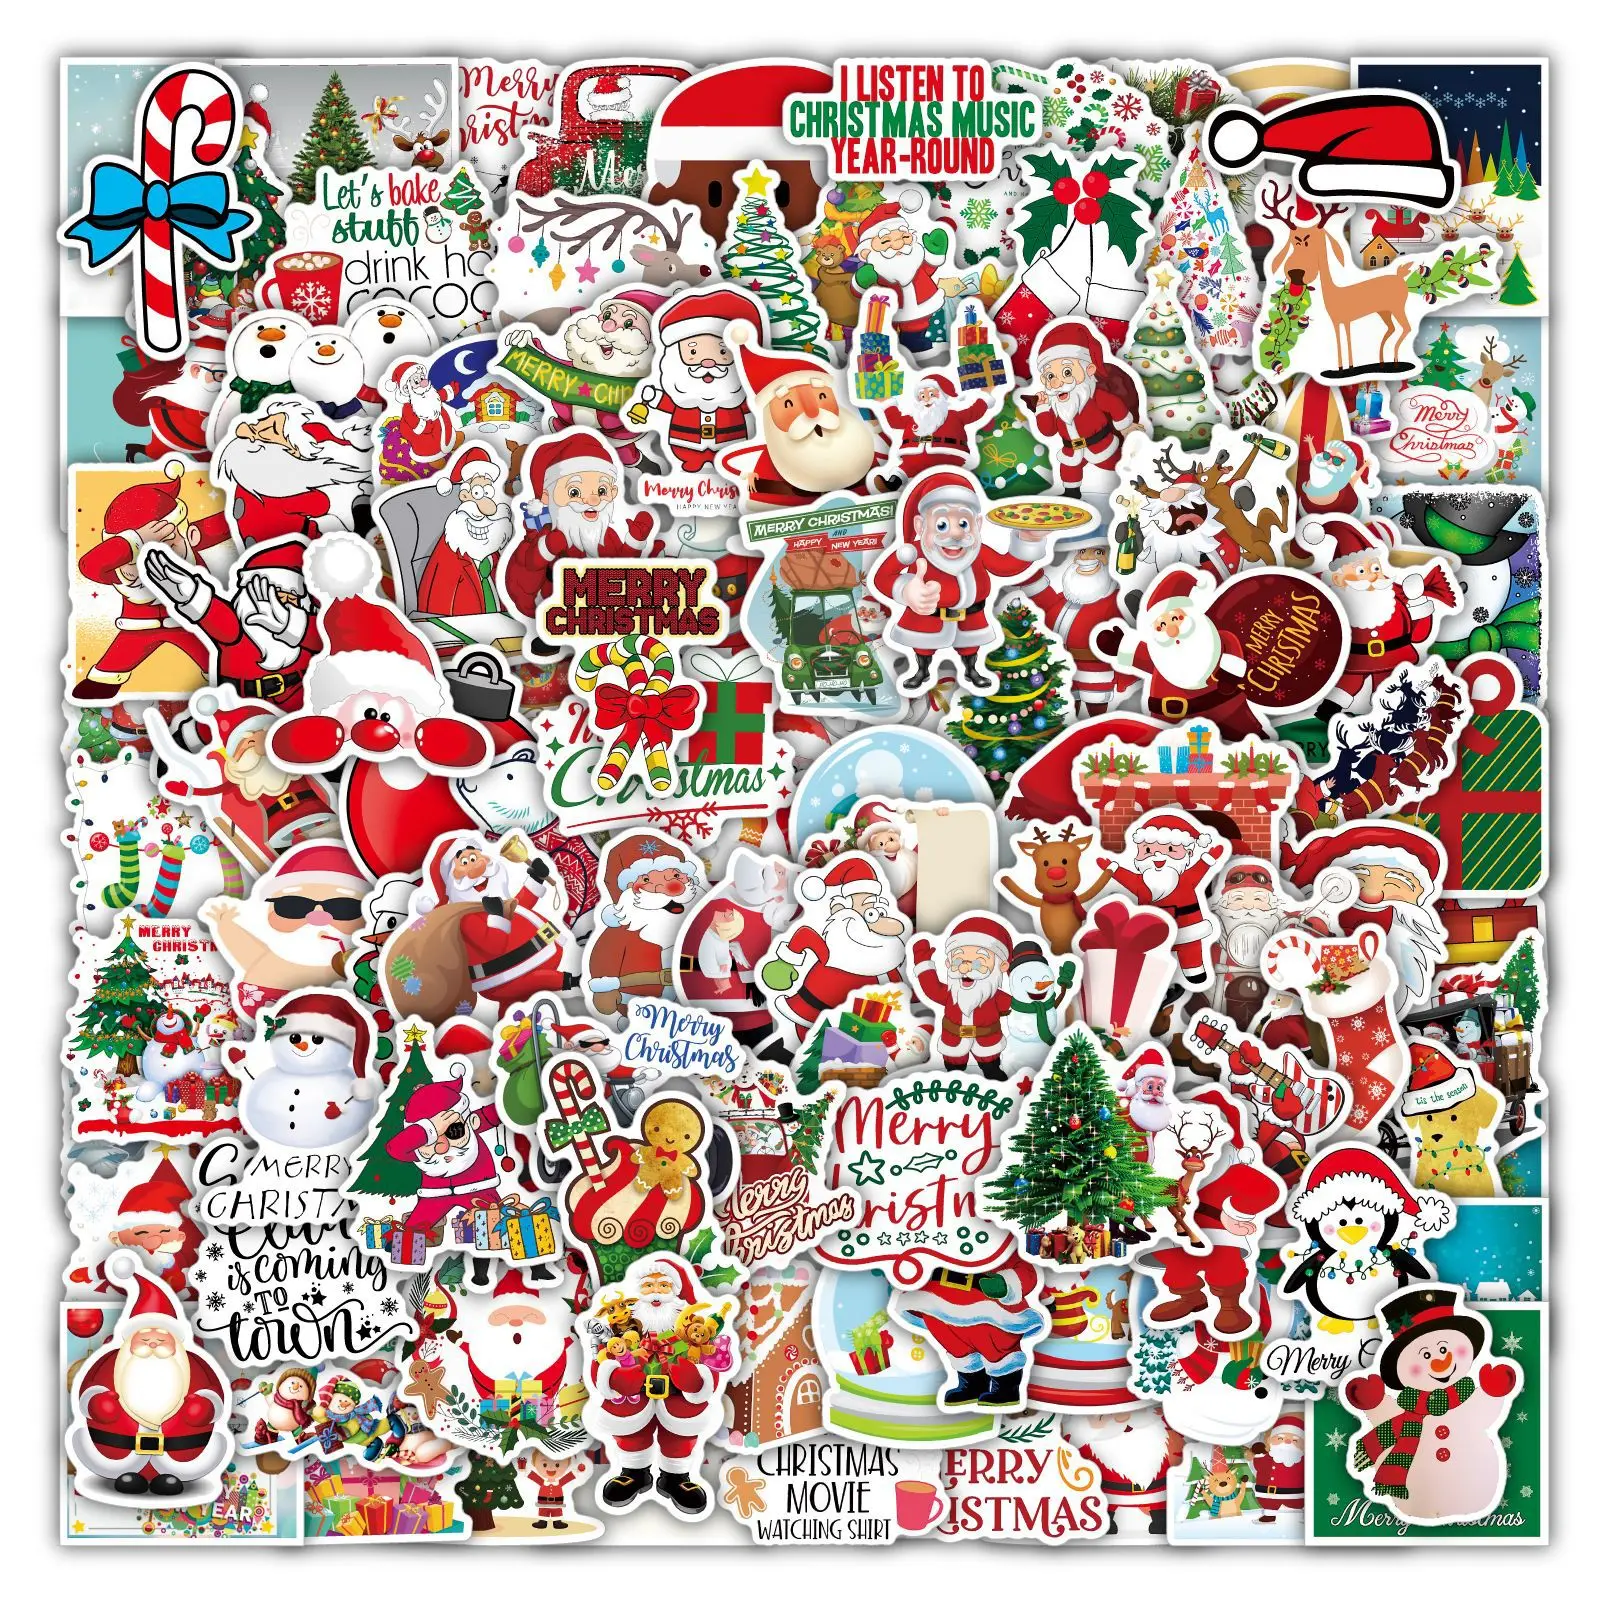 

Christmas Theme Stickers, Non-Repeating Vinyl Waterproof for Home, daily necessities, stationery decor Santa Claus Stickers Gi